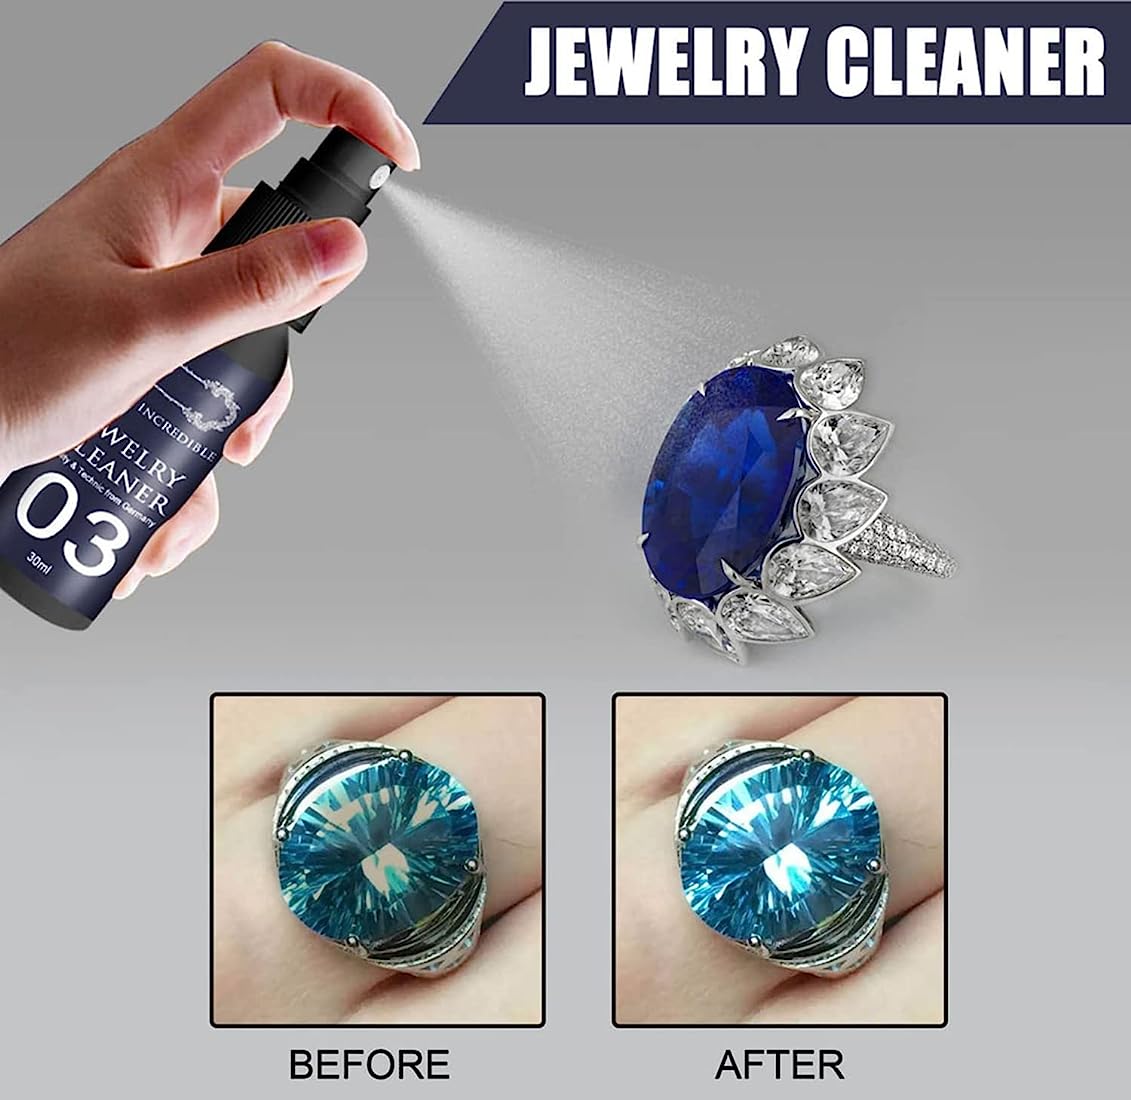 Reasons Why You Should Invest in a Jewellery Cleaner